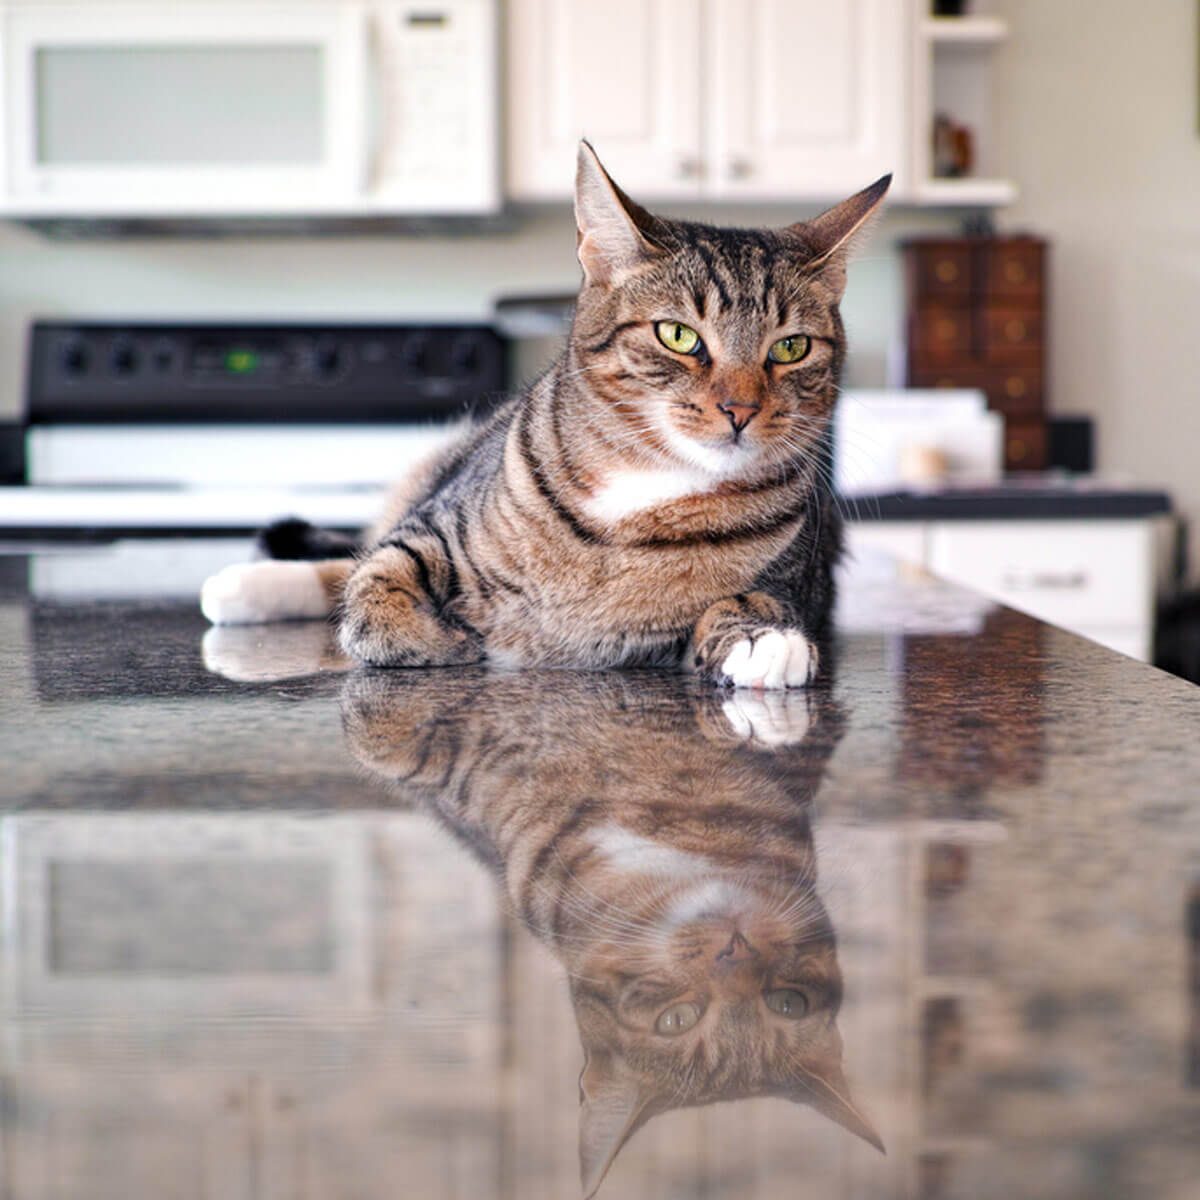 How to Keep Your Cat Off the Counter: Top 10 Ways